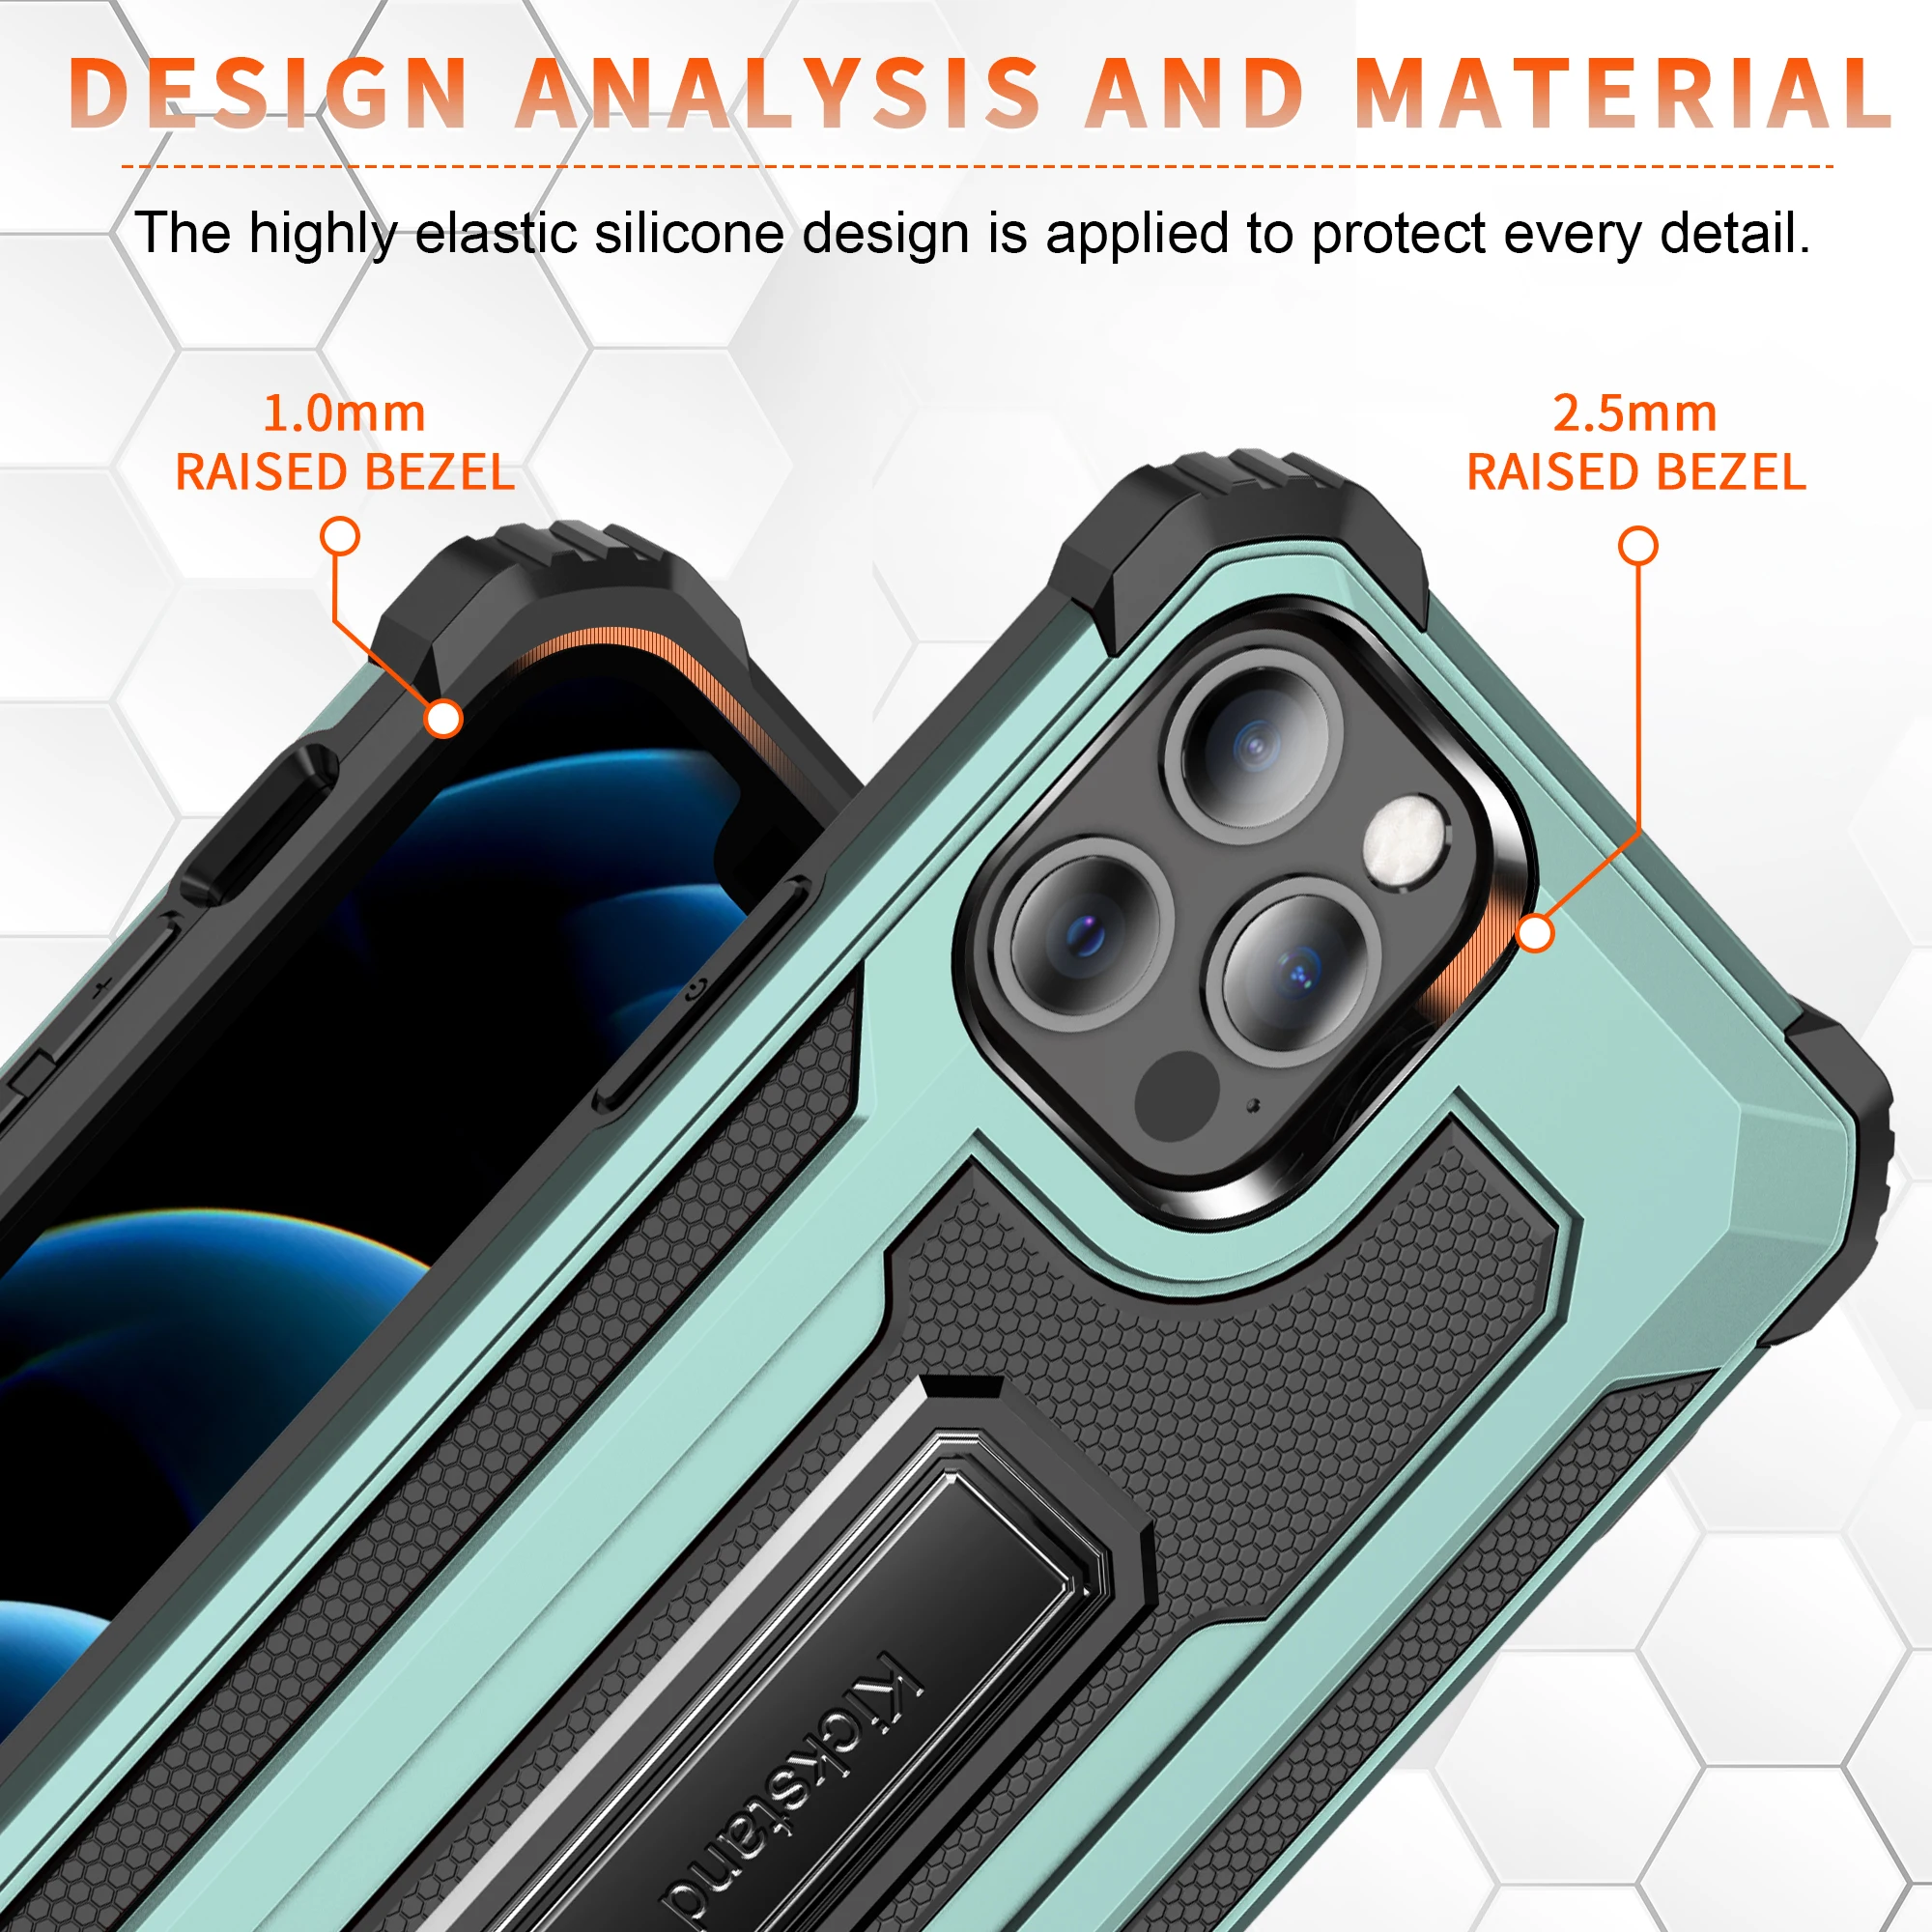 

Rugged Armor Phone Case For Samsung Galaxy A30S A20S A10S A70 A50 A50S A30 A20 A10E M10S A01 J2 Core 2020 Shockproof Stand Cover